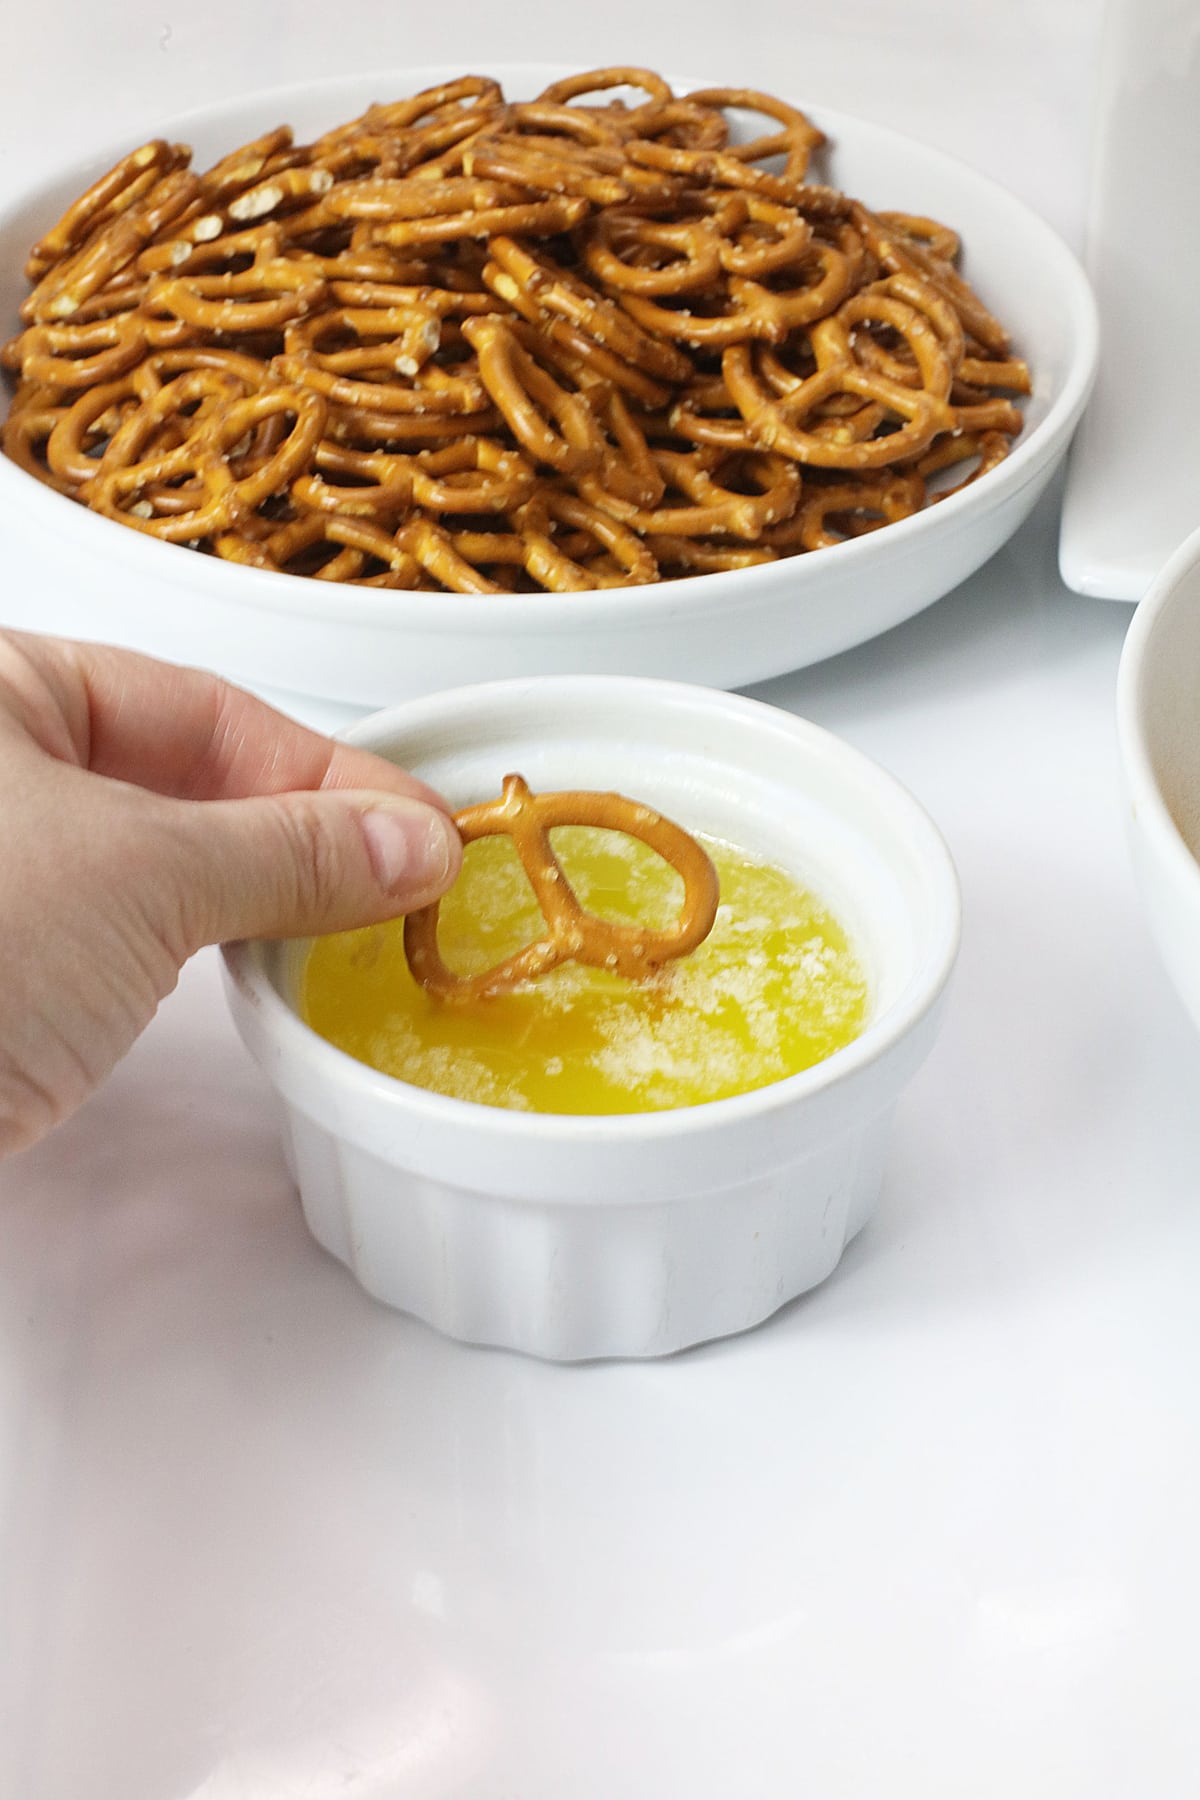 Dipping a pretzel in melted butter.